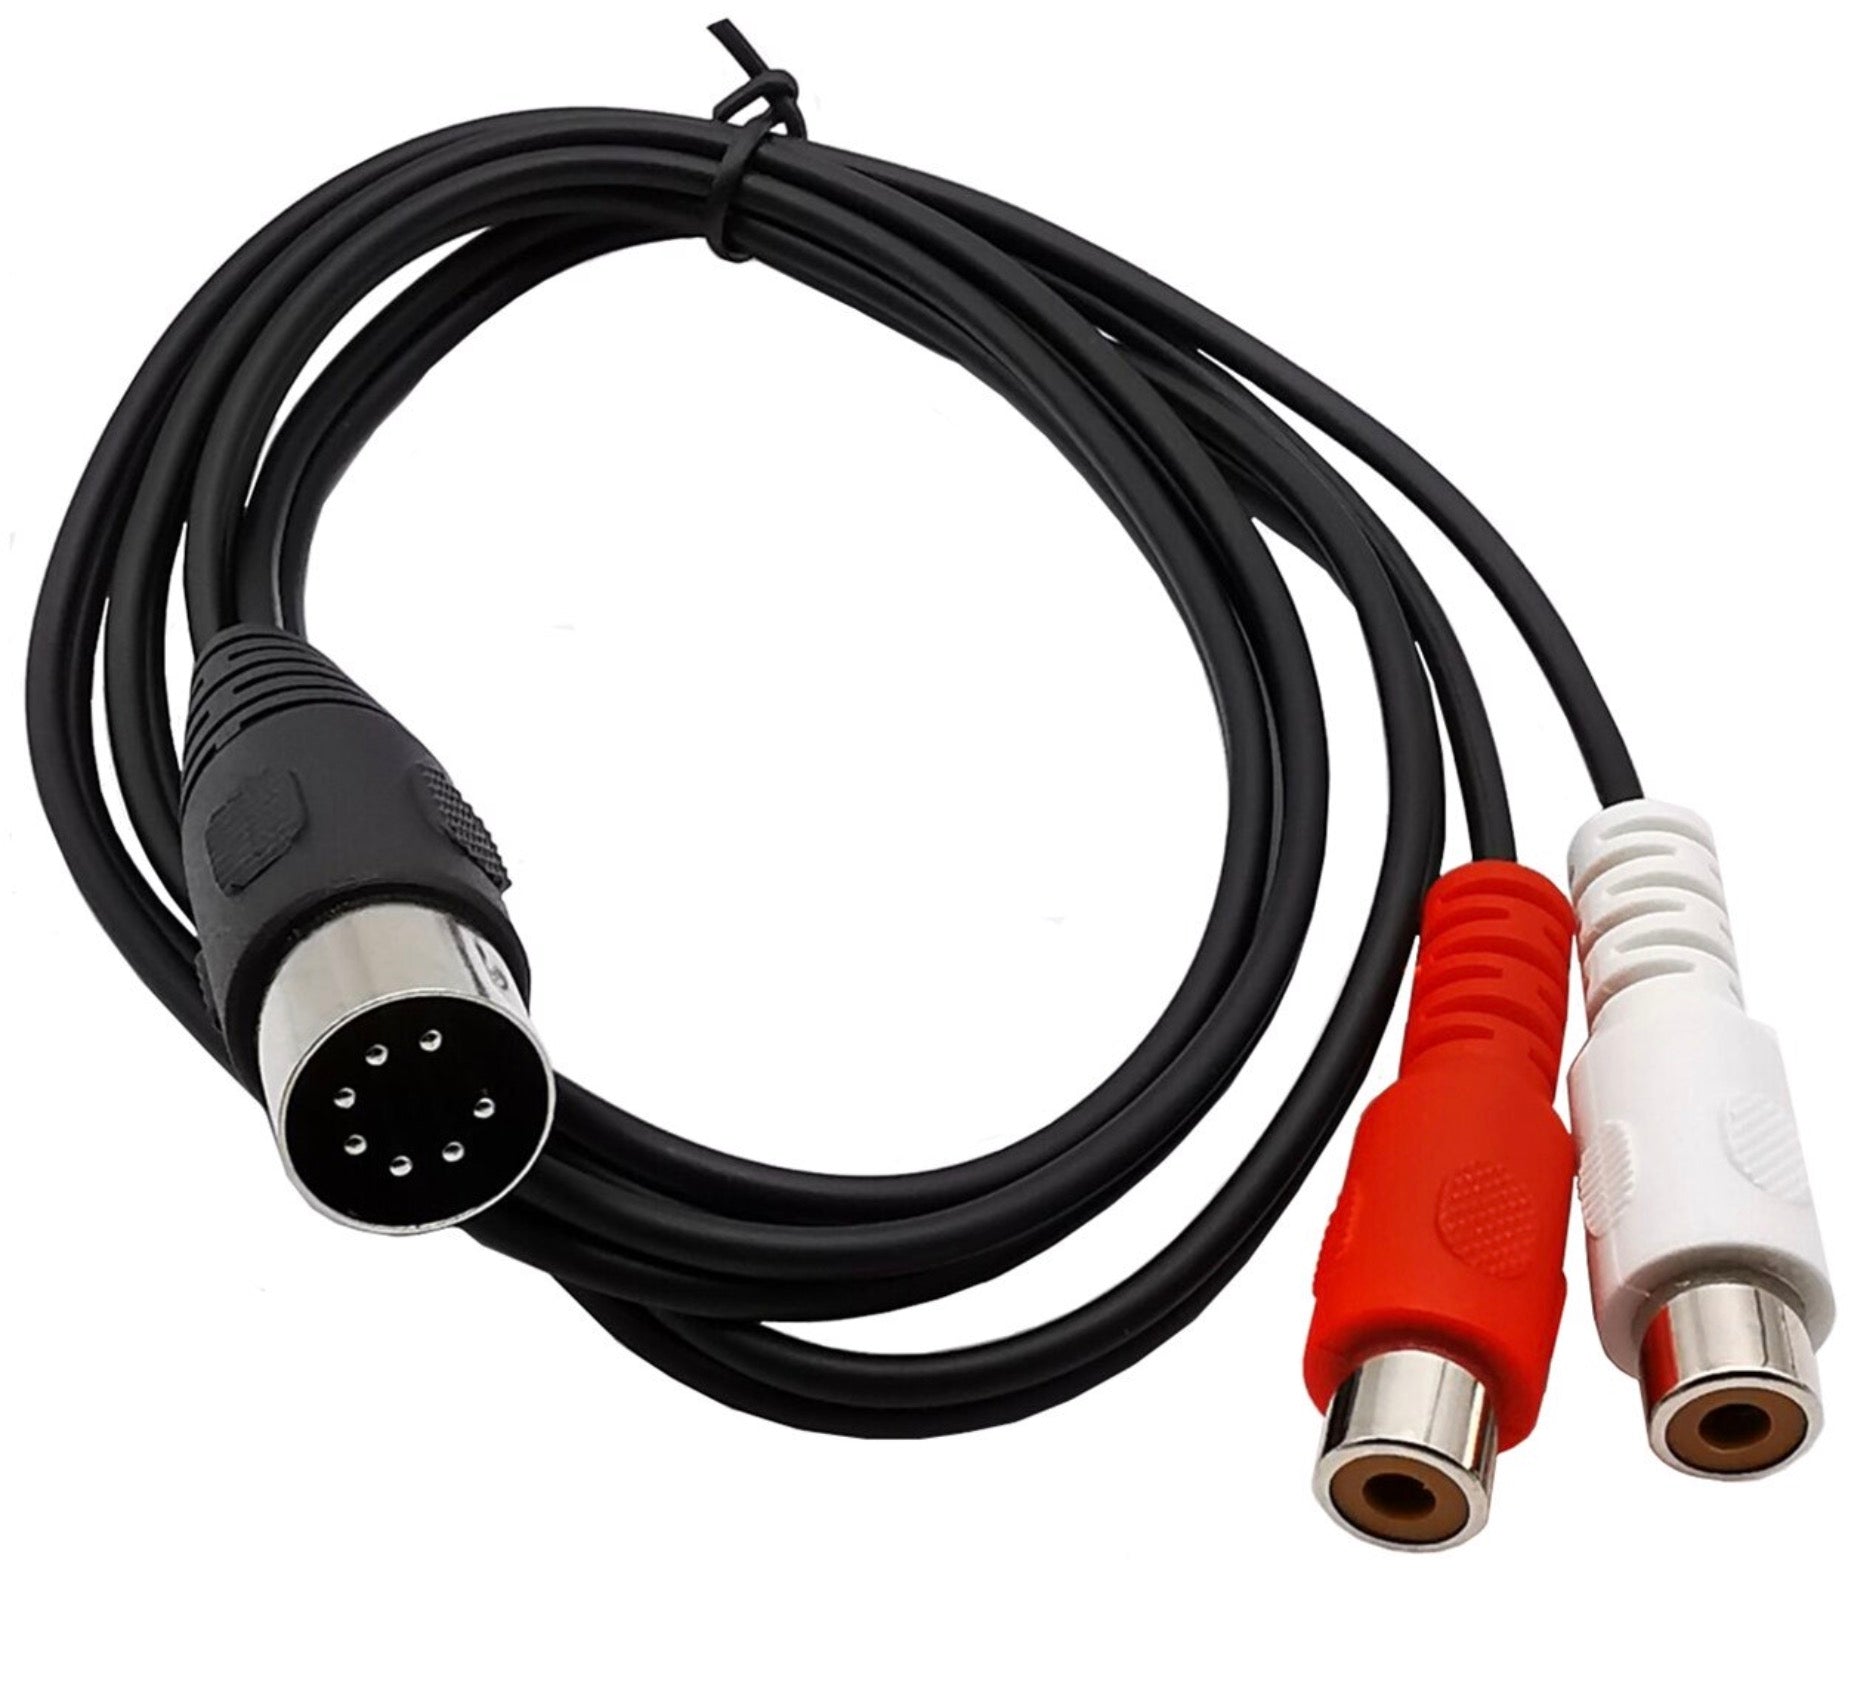 7Pin Din Male to 2 RCA Female Audio Cable for Bang & Olufsen, Naim, Quad.Stereo Systems